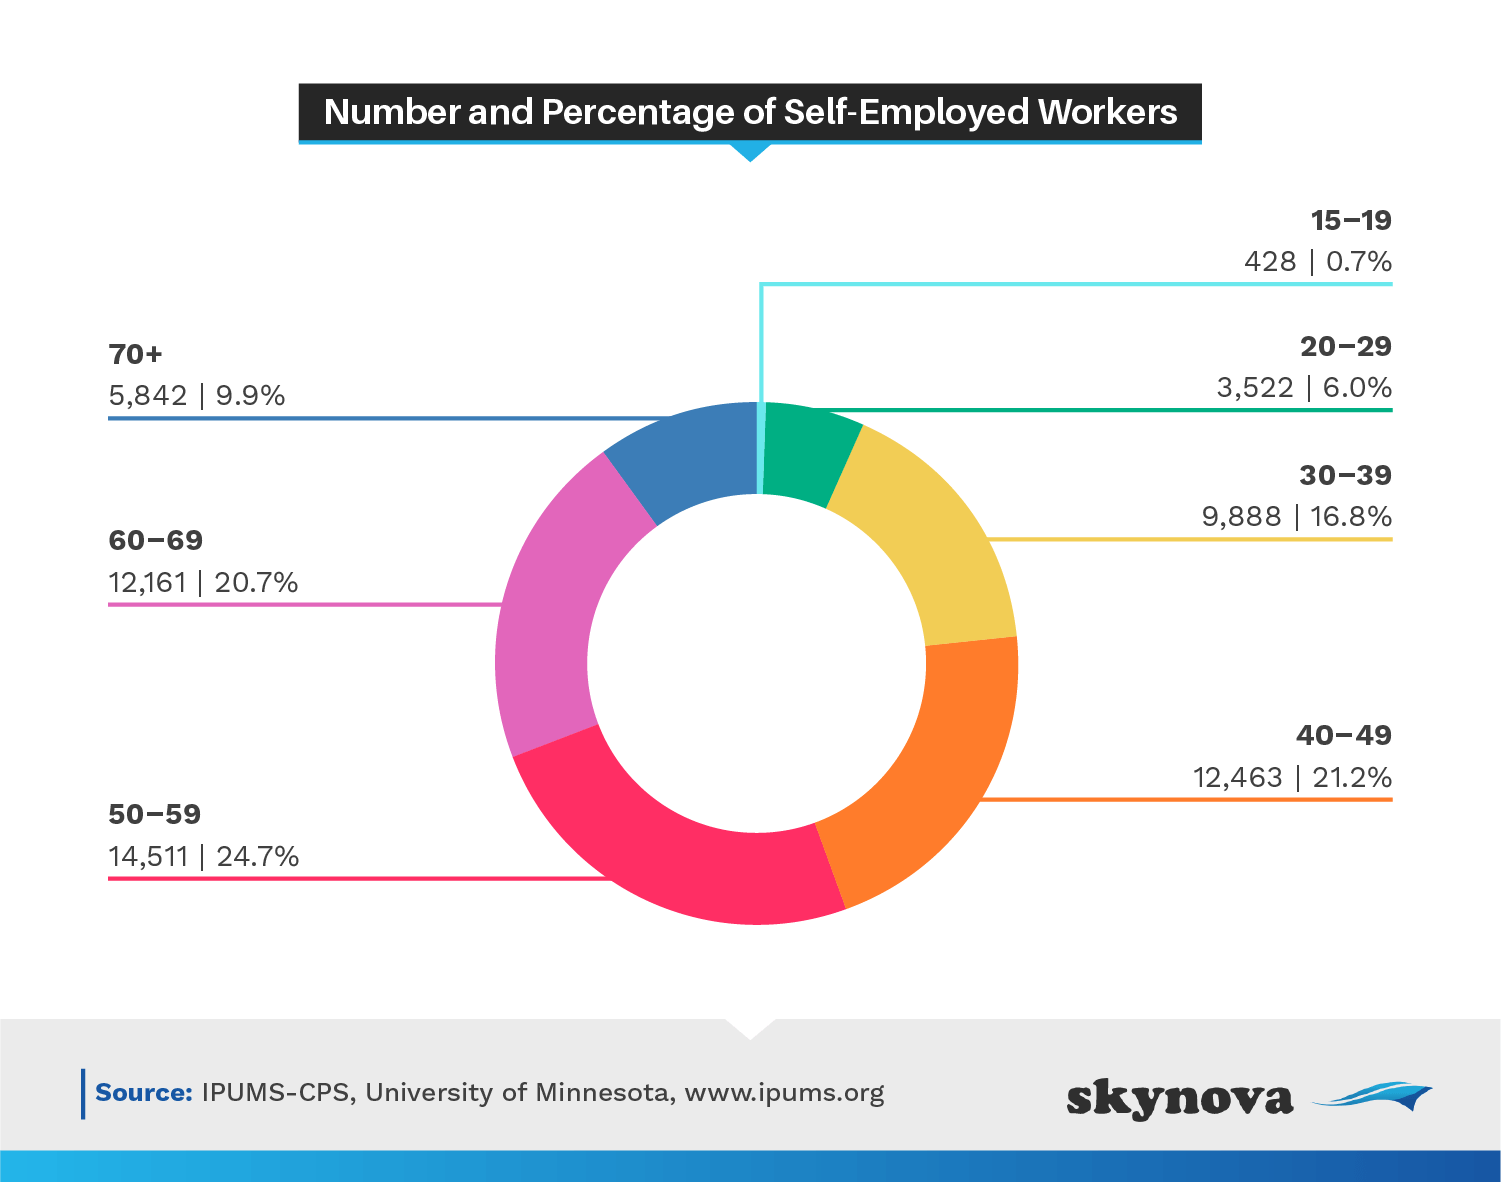 Percentage of Self Employed Workers by Age Group